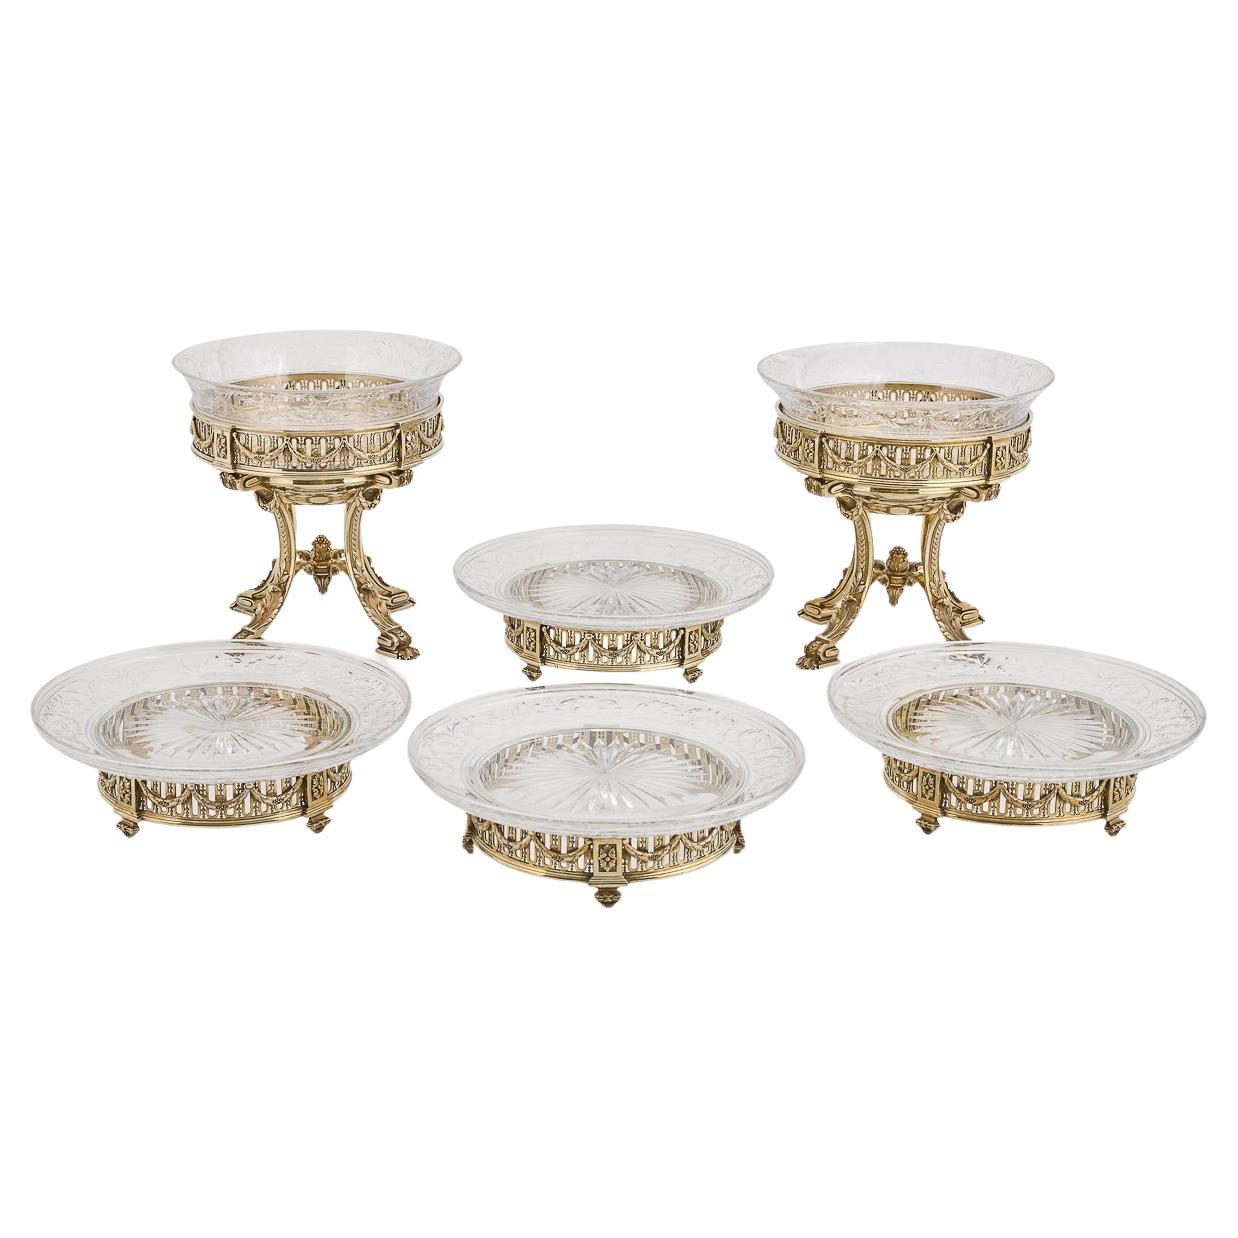 19th Century French Silver Gilt Set Of Six Comports, Boin-Taburet, c.1890